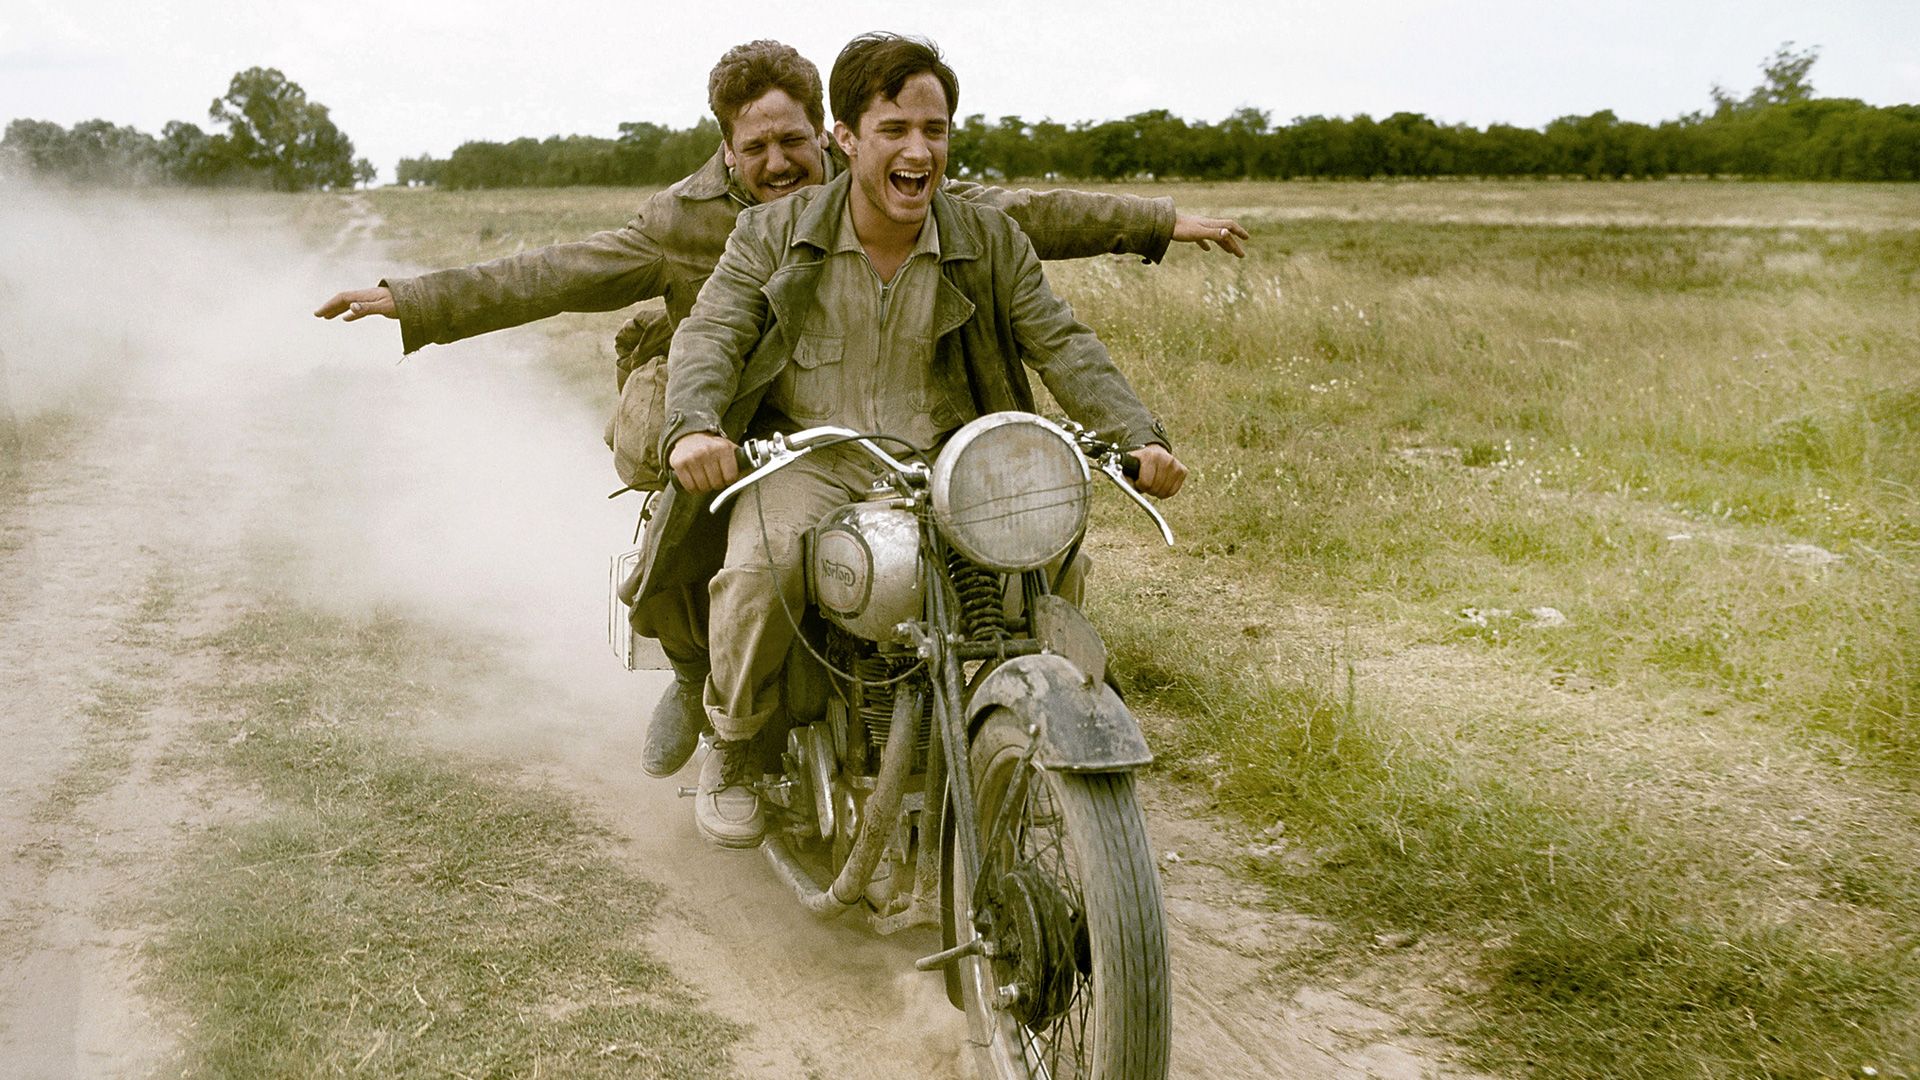 The Motorcycle Diaries background